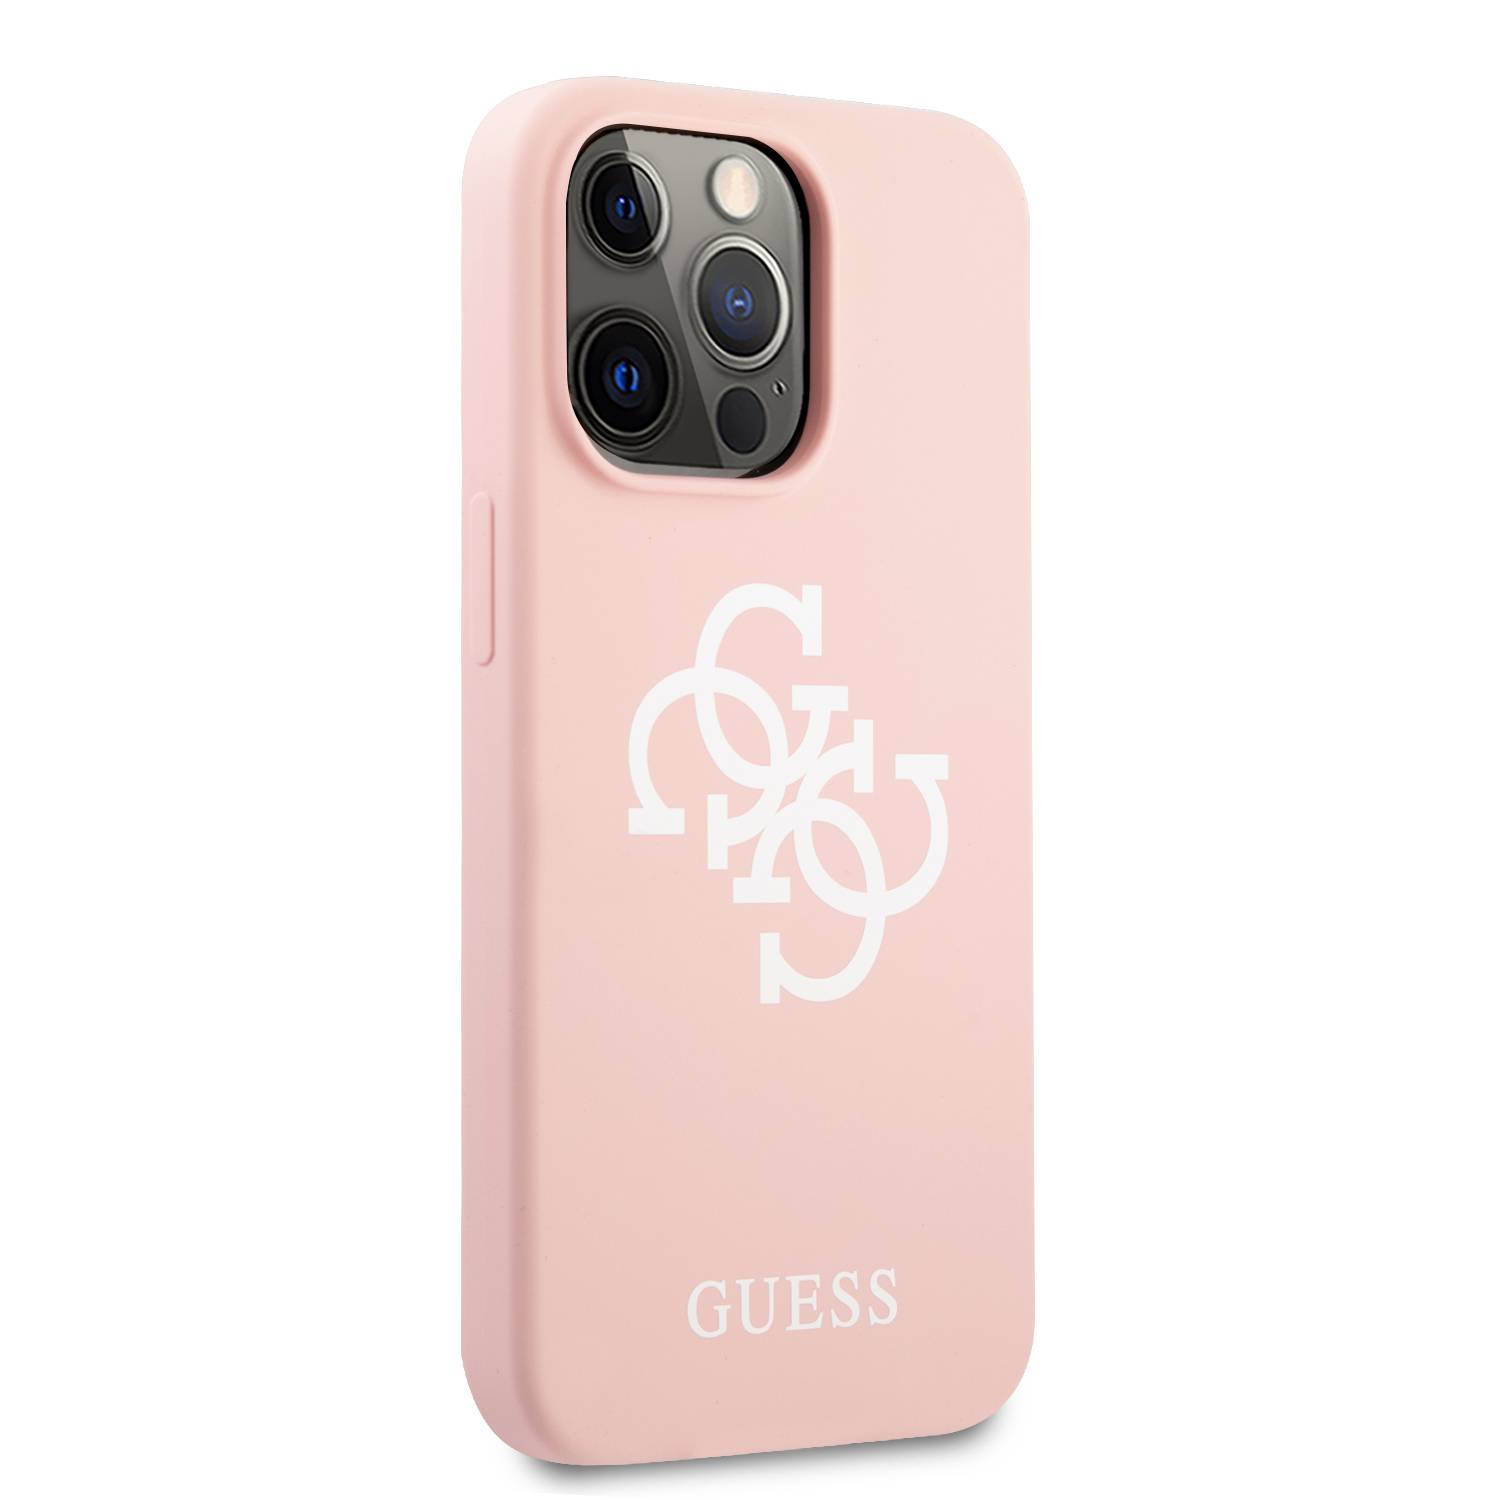 Cg Mobile Guess Pu 4g Big Metal Logo Hard Case Cover For Iphone 13, Color  Pink - Mobile Phone Cases & Covers - AliExpress